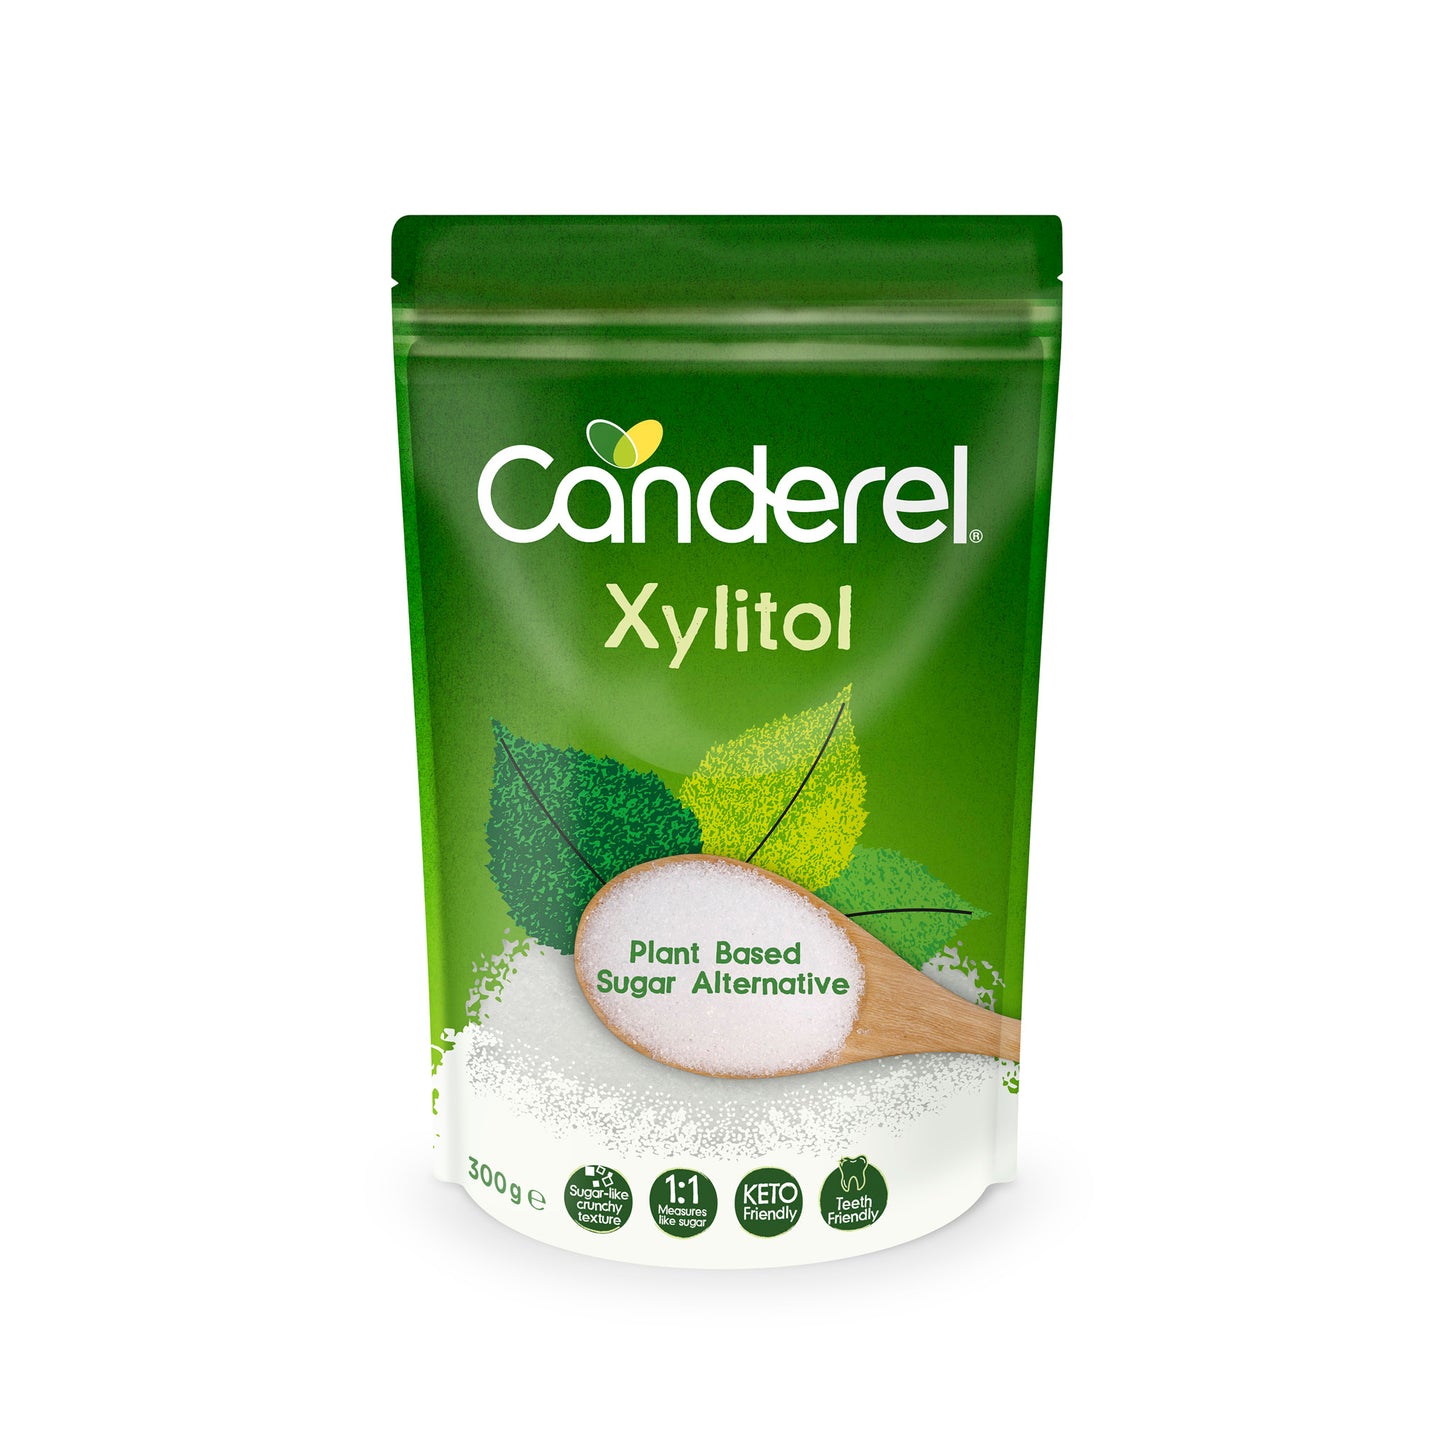 Canderel Xylitol 300g